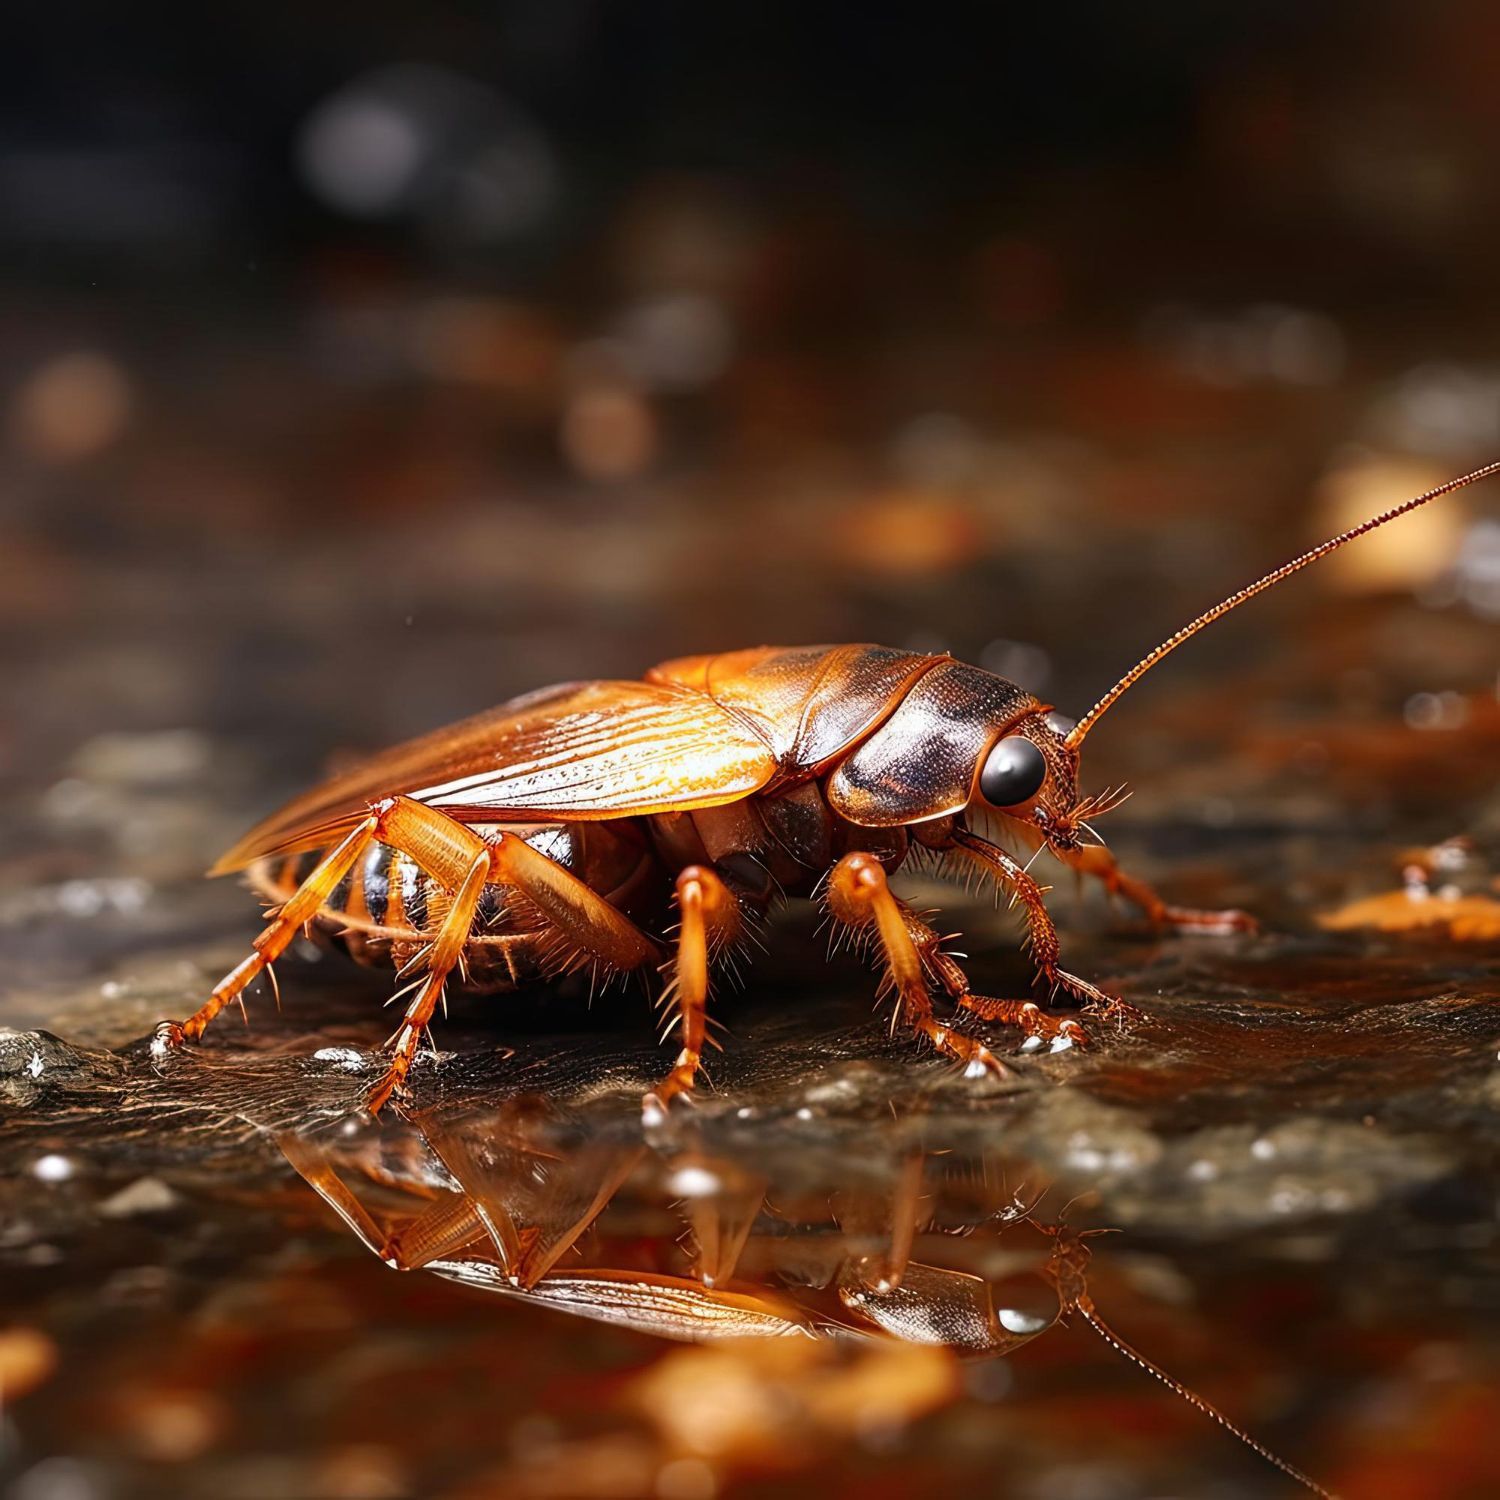 Cockroach in a puddle of water